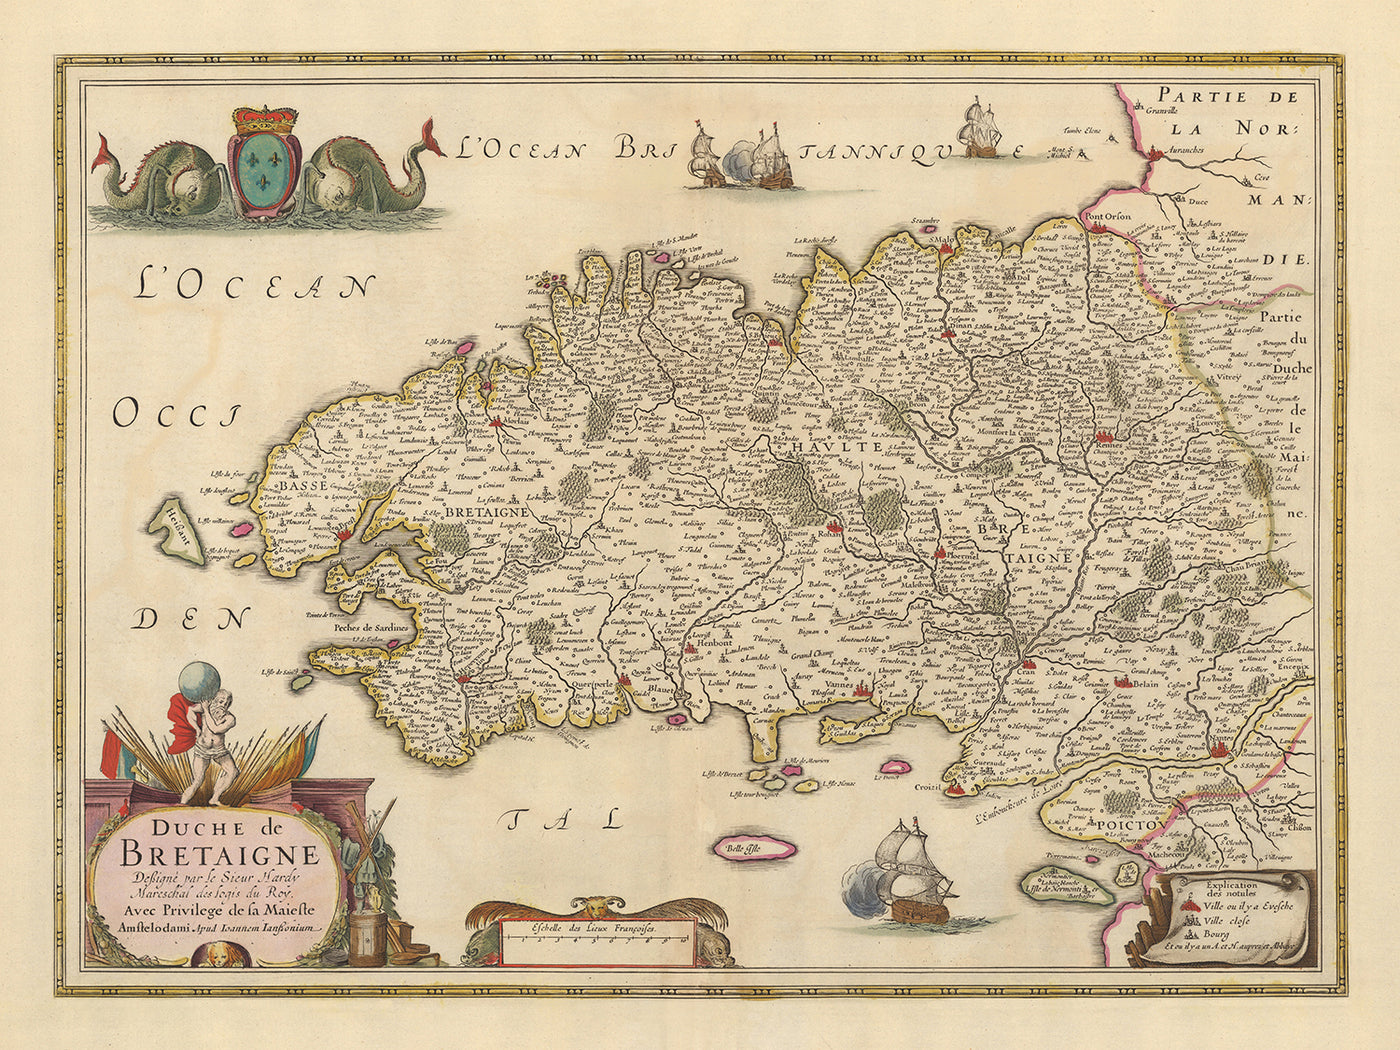 Old Map of Brittany by Nicolaes Visscher, 1690: Rennes, Nantes, Brest, Saint-Malo, and Vannes